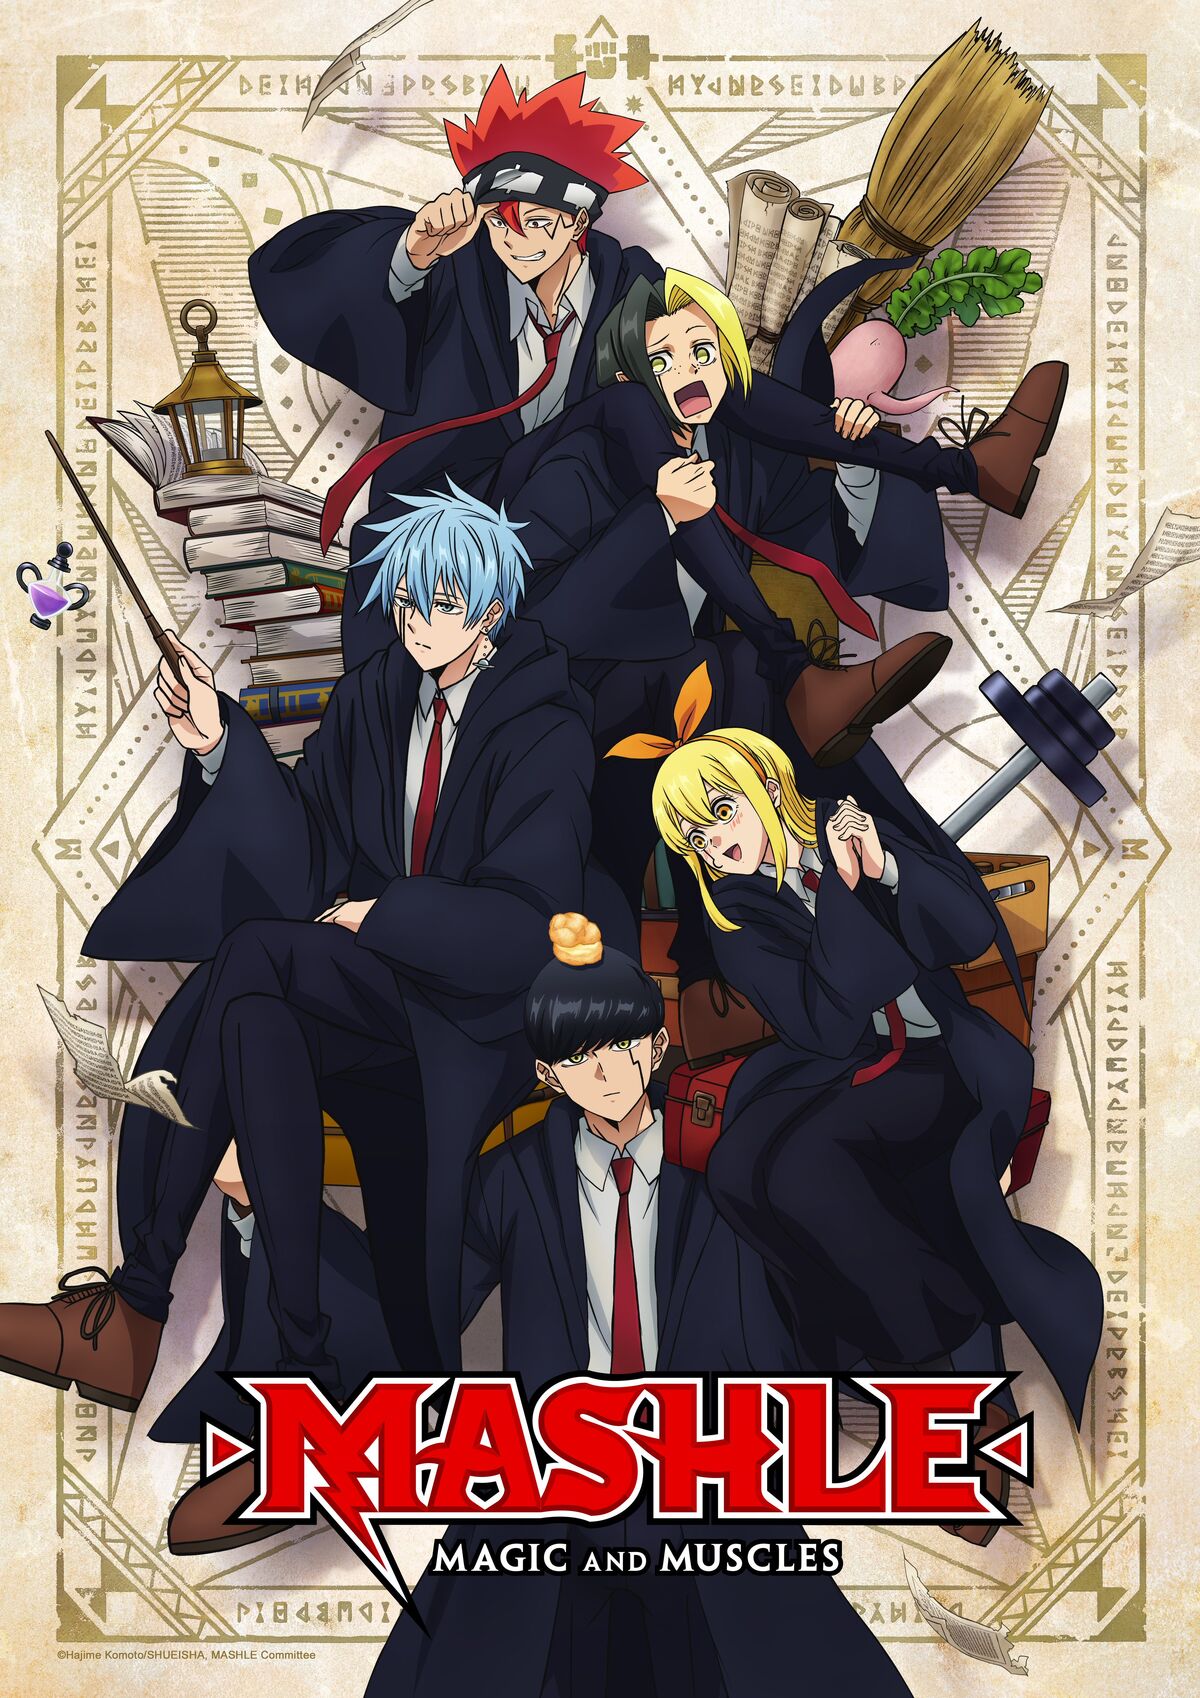 Mashle: Magic and Muscles, Anime Voice-Over Wiki